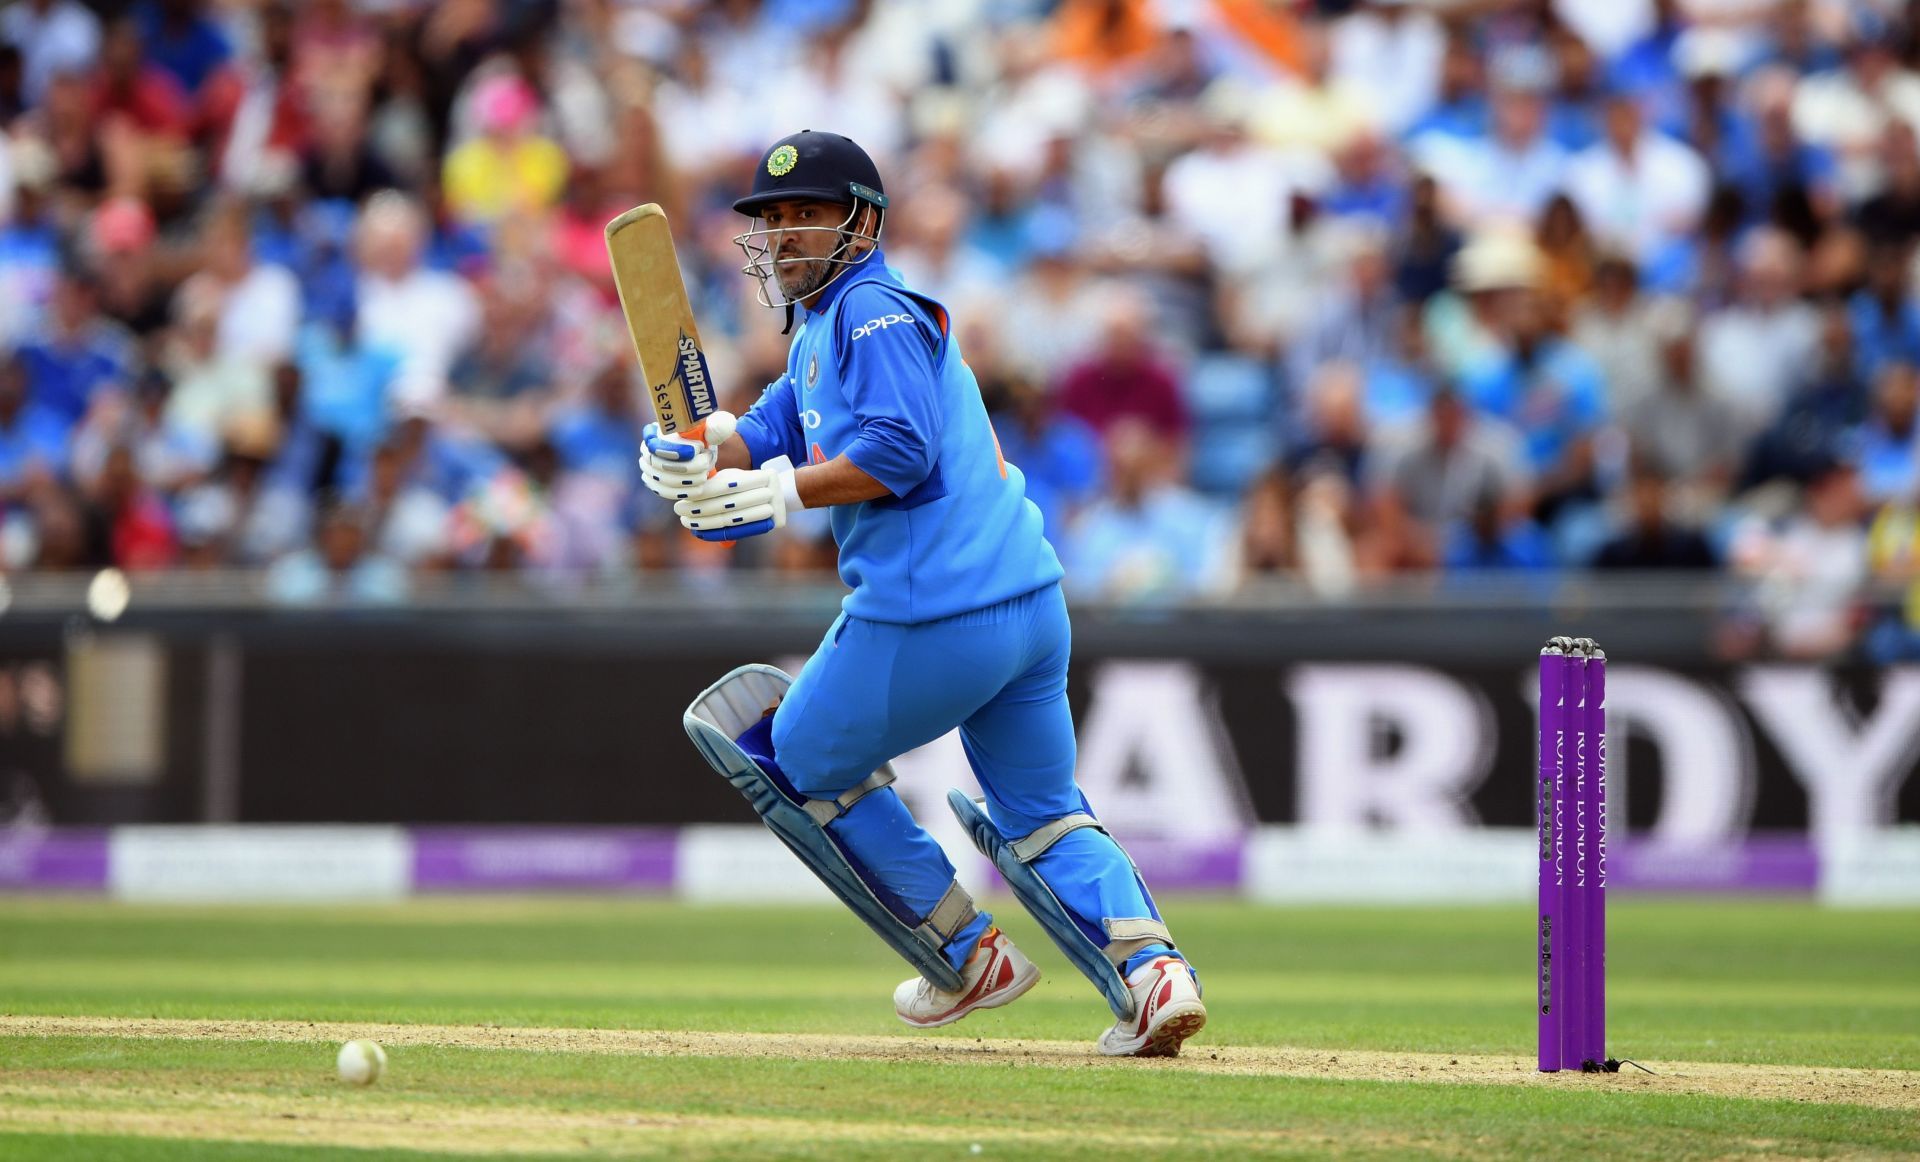 MS Dhoni performed decently for India in that series